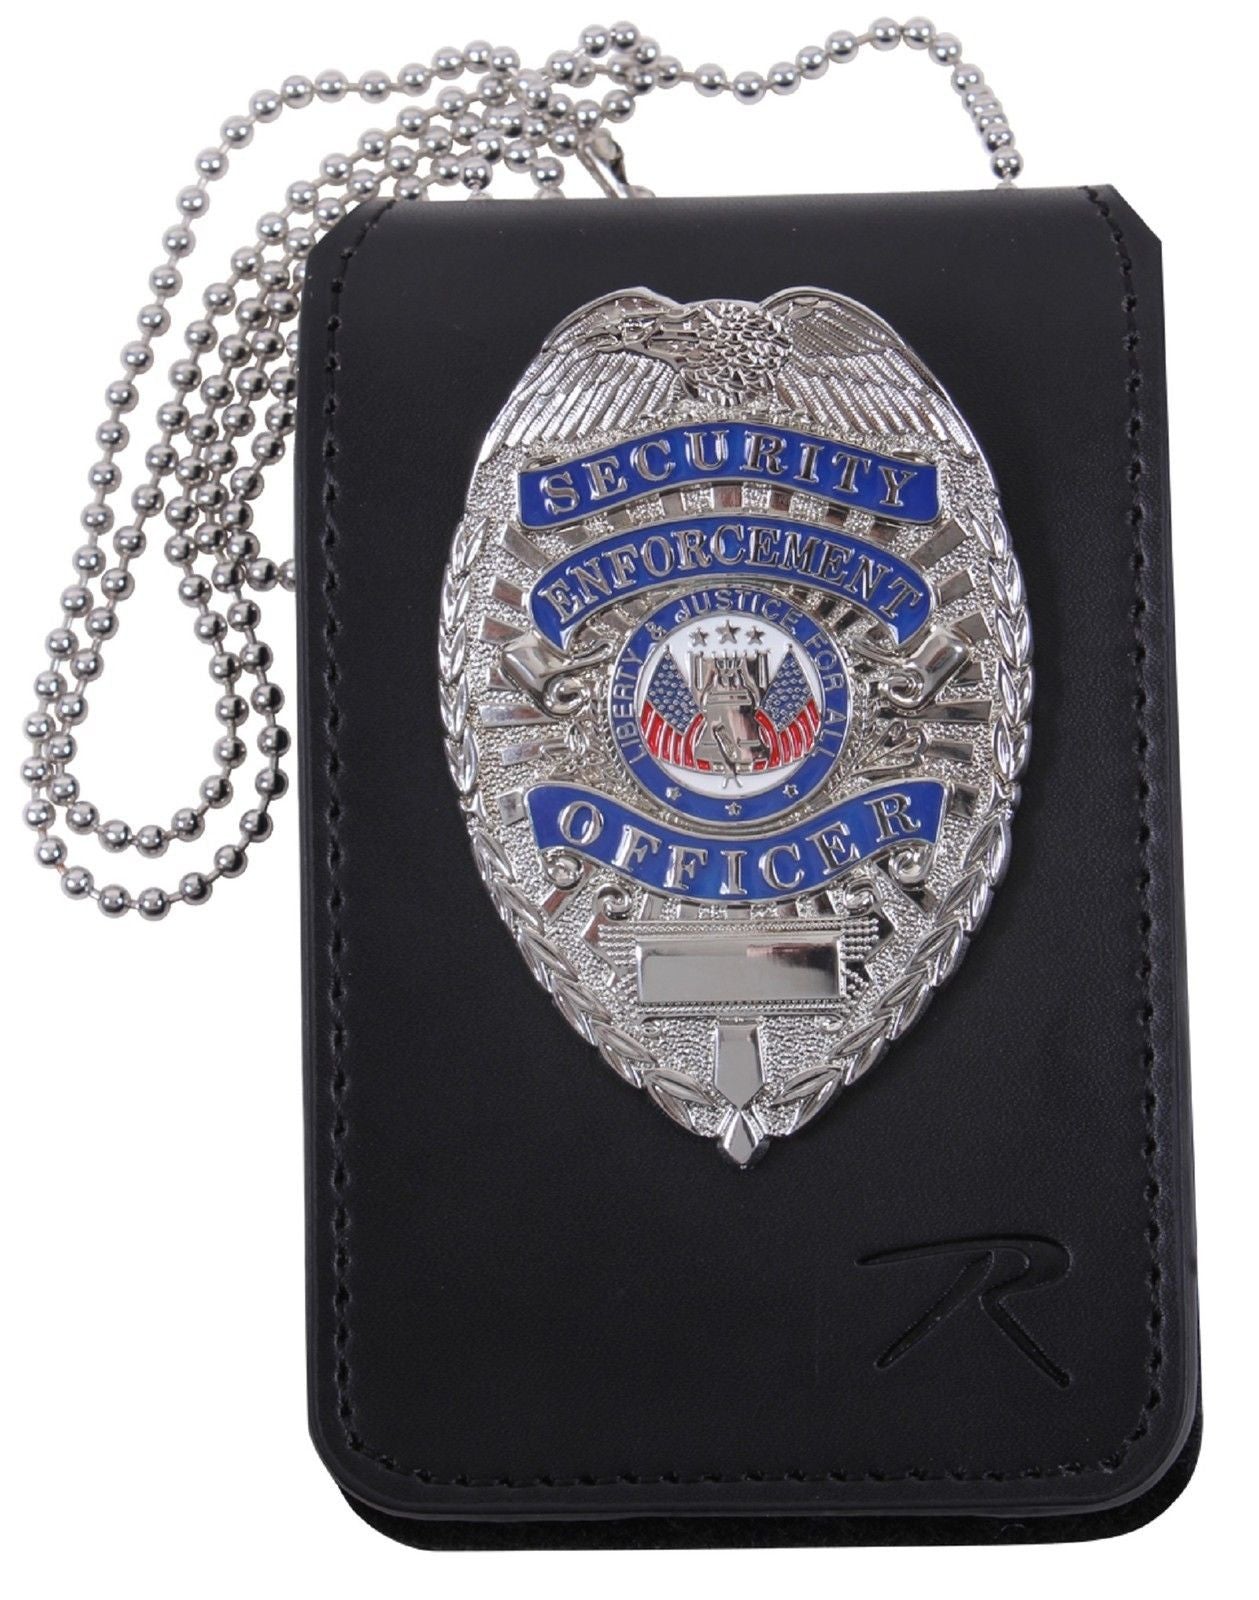 Black Leather Law Enforcement Security ID & Badge Holder w/ 33" Neck Chain 1136